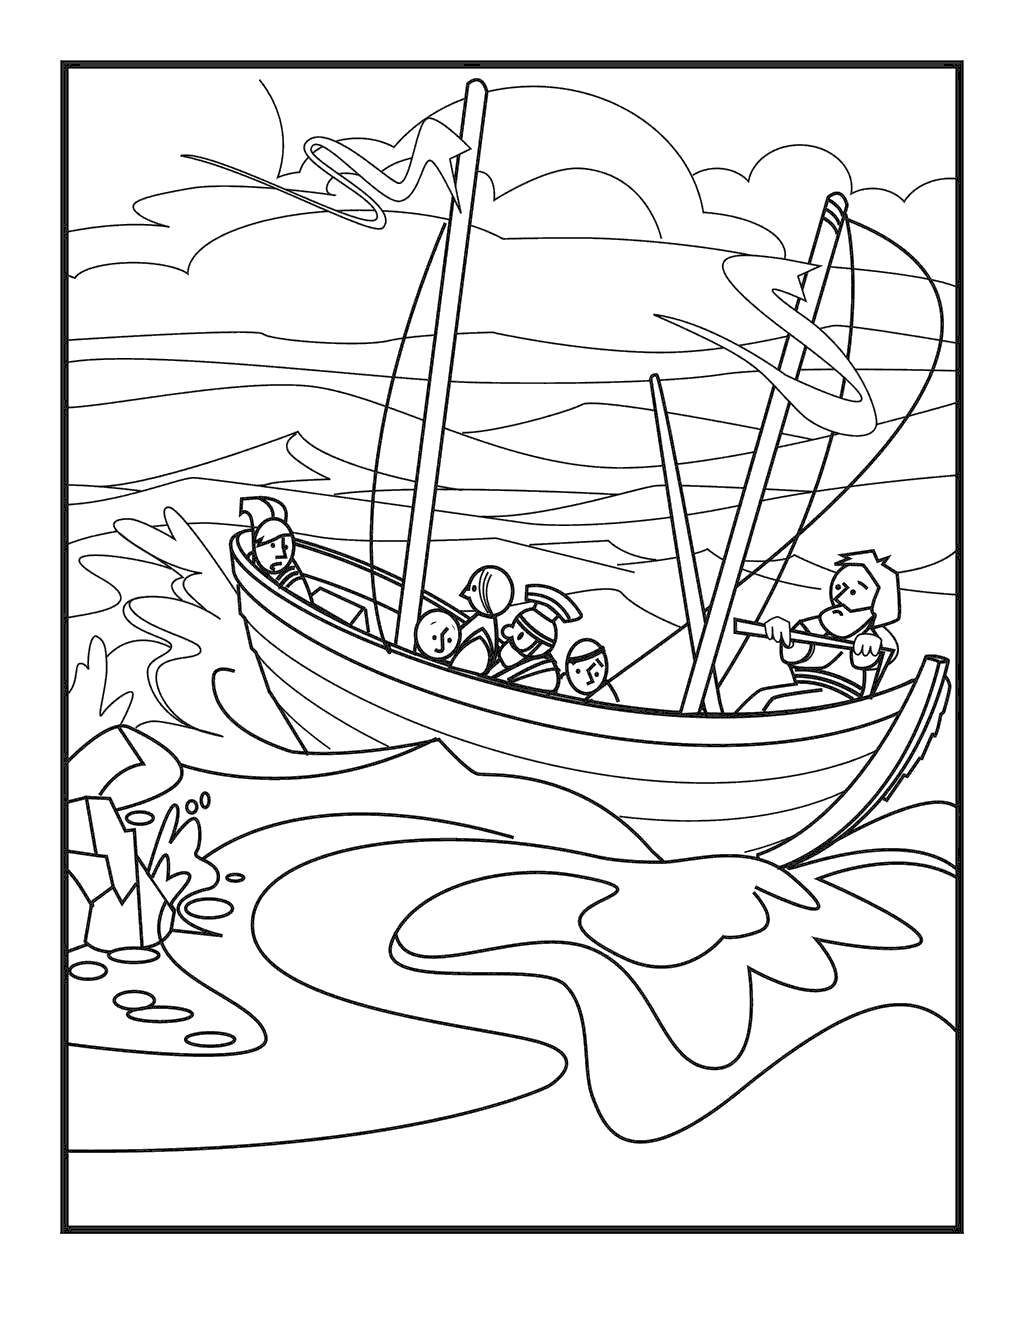 free-coloring-pages-of-jesus-calming-the-storm-boringpop